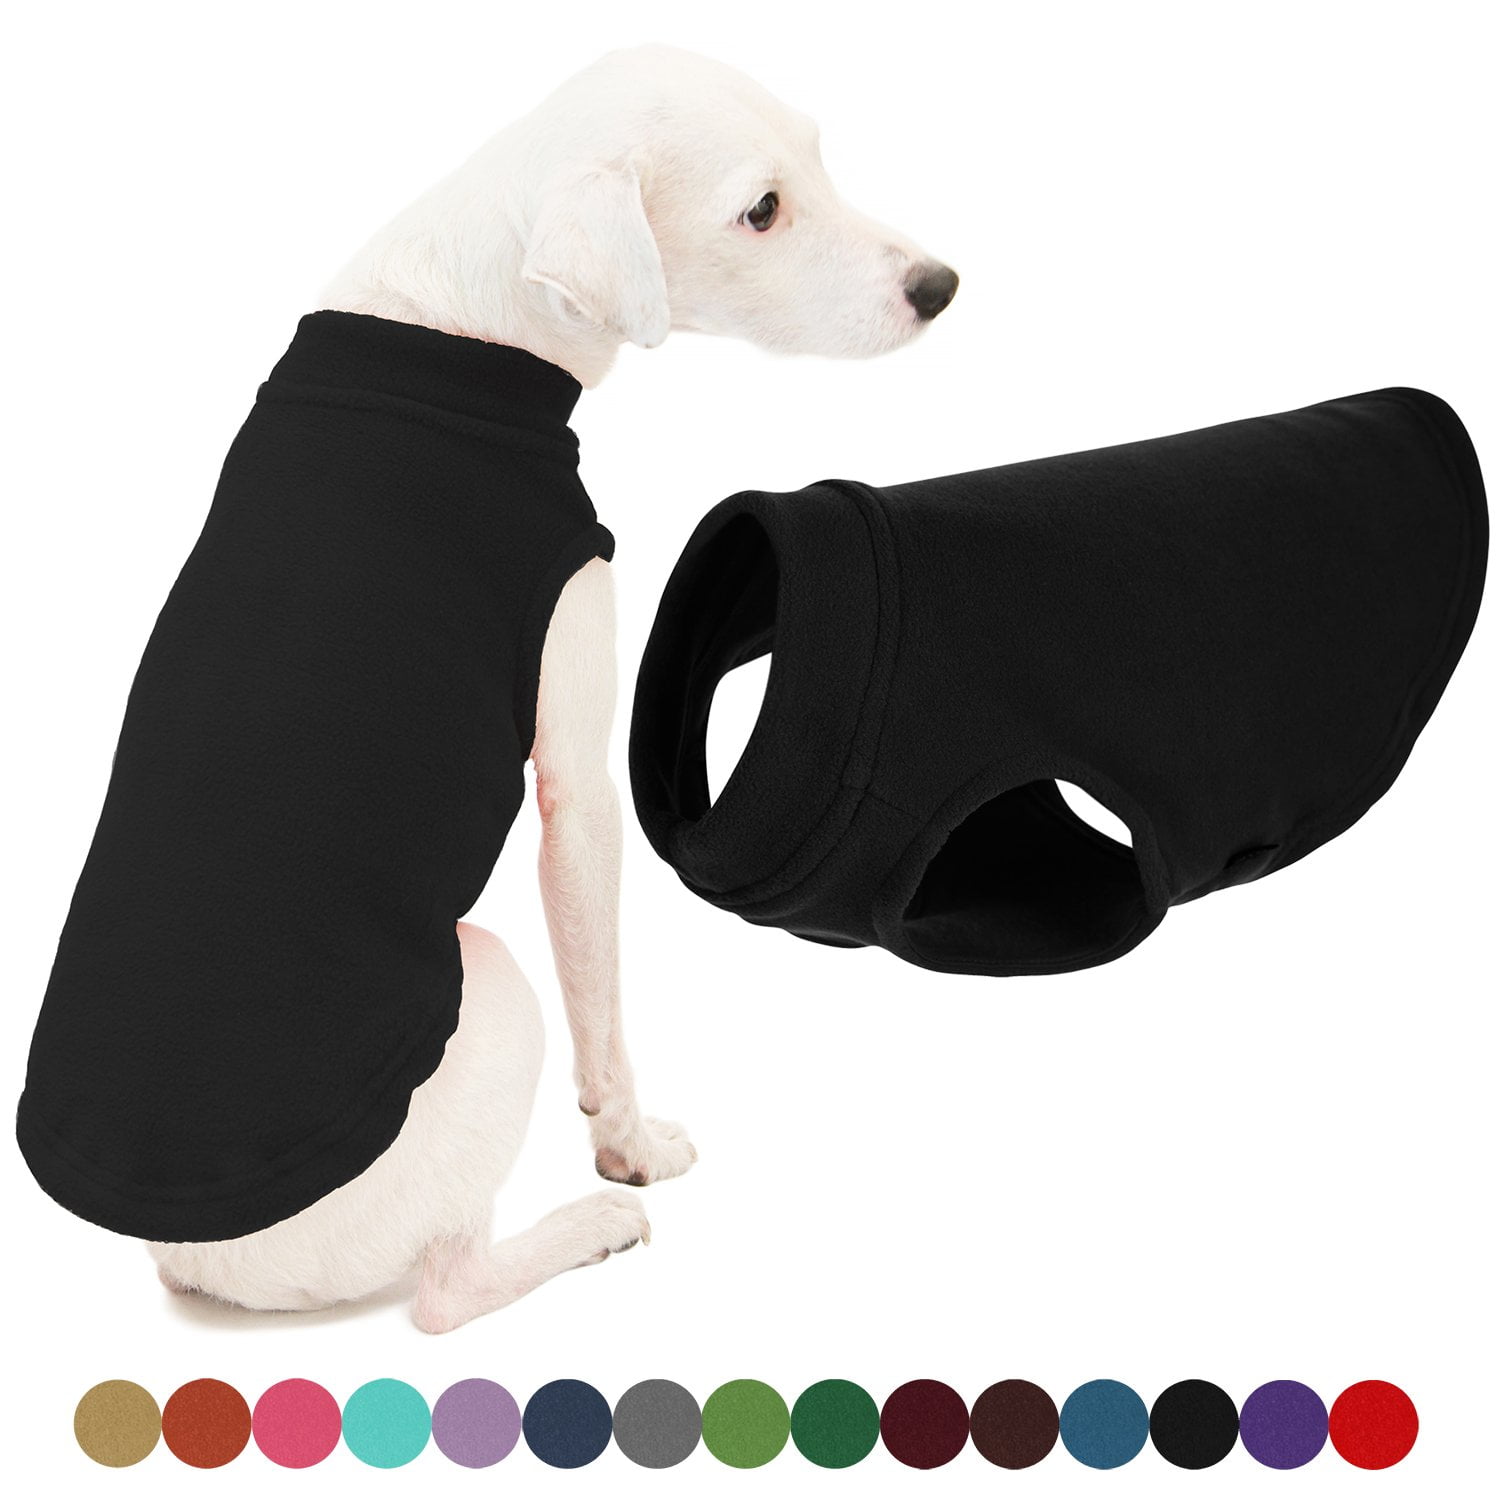 sweater vest for dogs